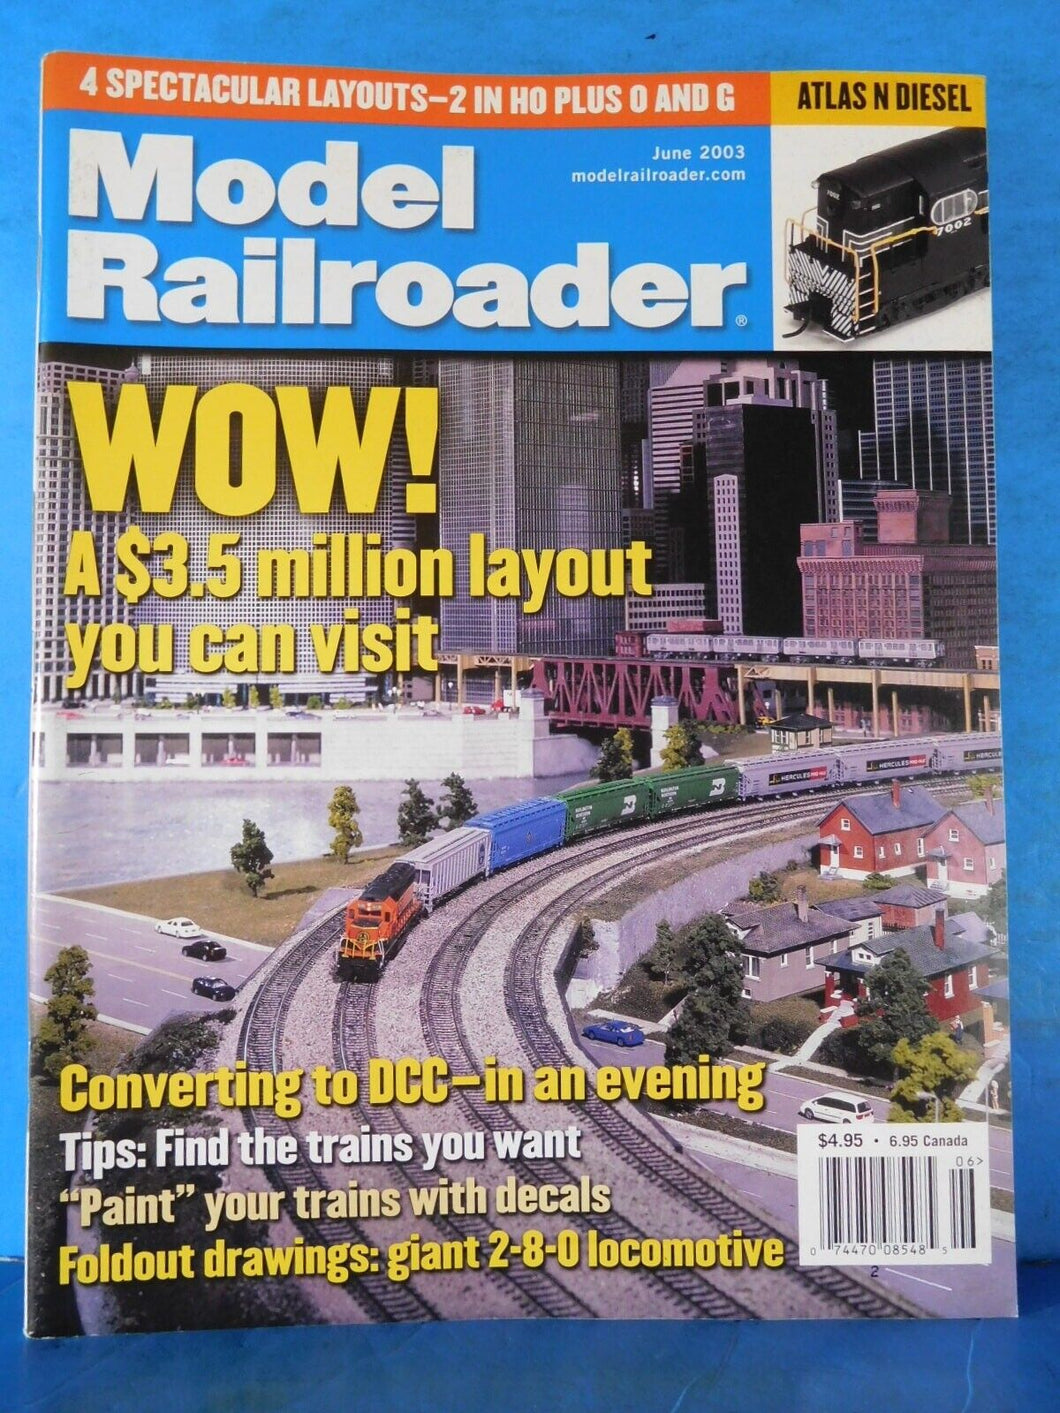 Model Railroader Magazine 2003 June Paint your trains with decals Coverting to D